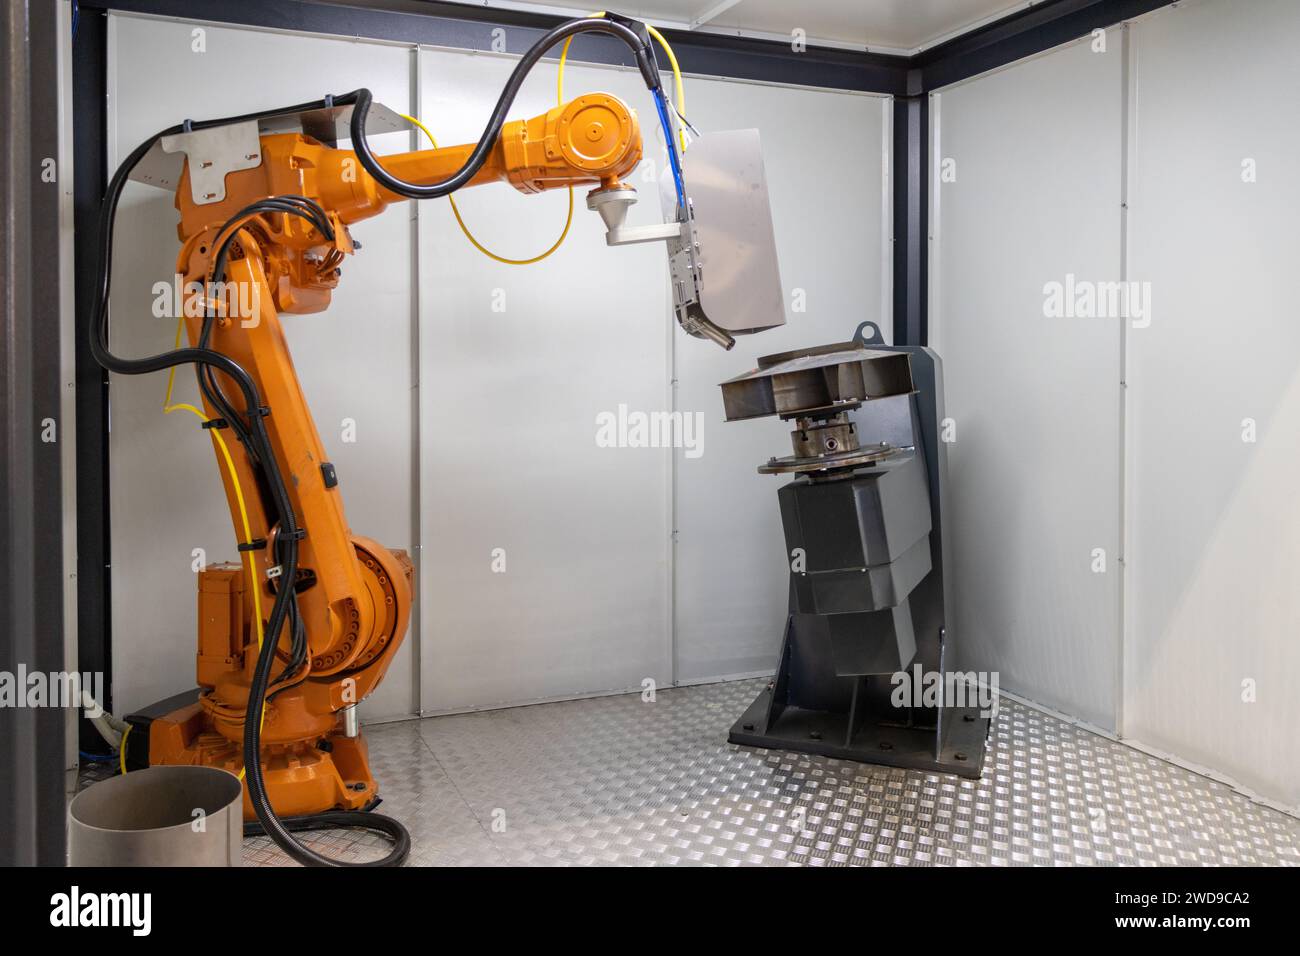 Industrial robot automation arm doing metal welding. Robotic machine arm in factory. Modern industrial technology. unmanned factory production Stock Photo